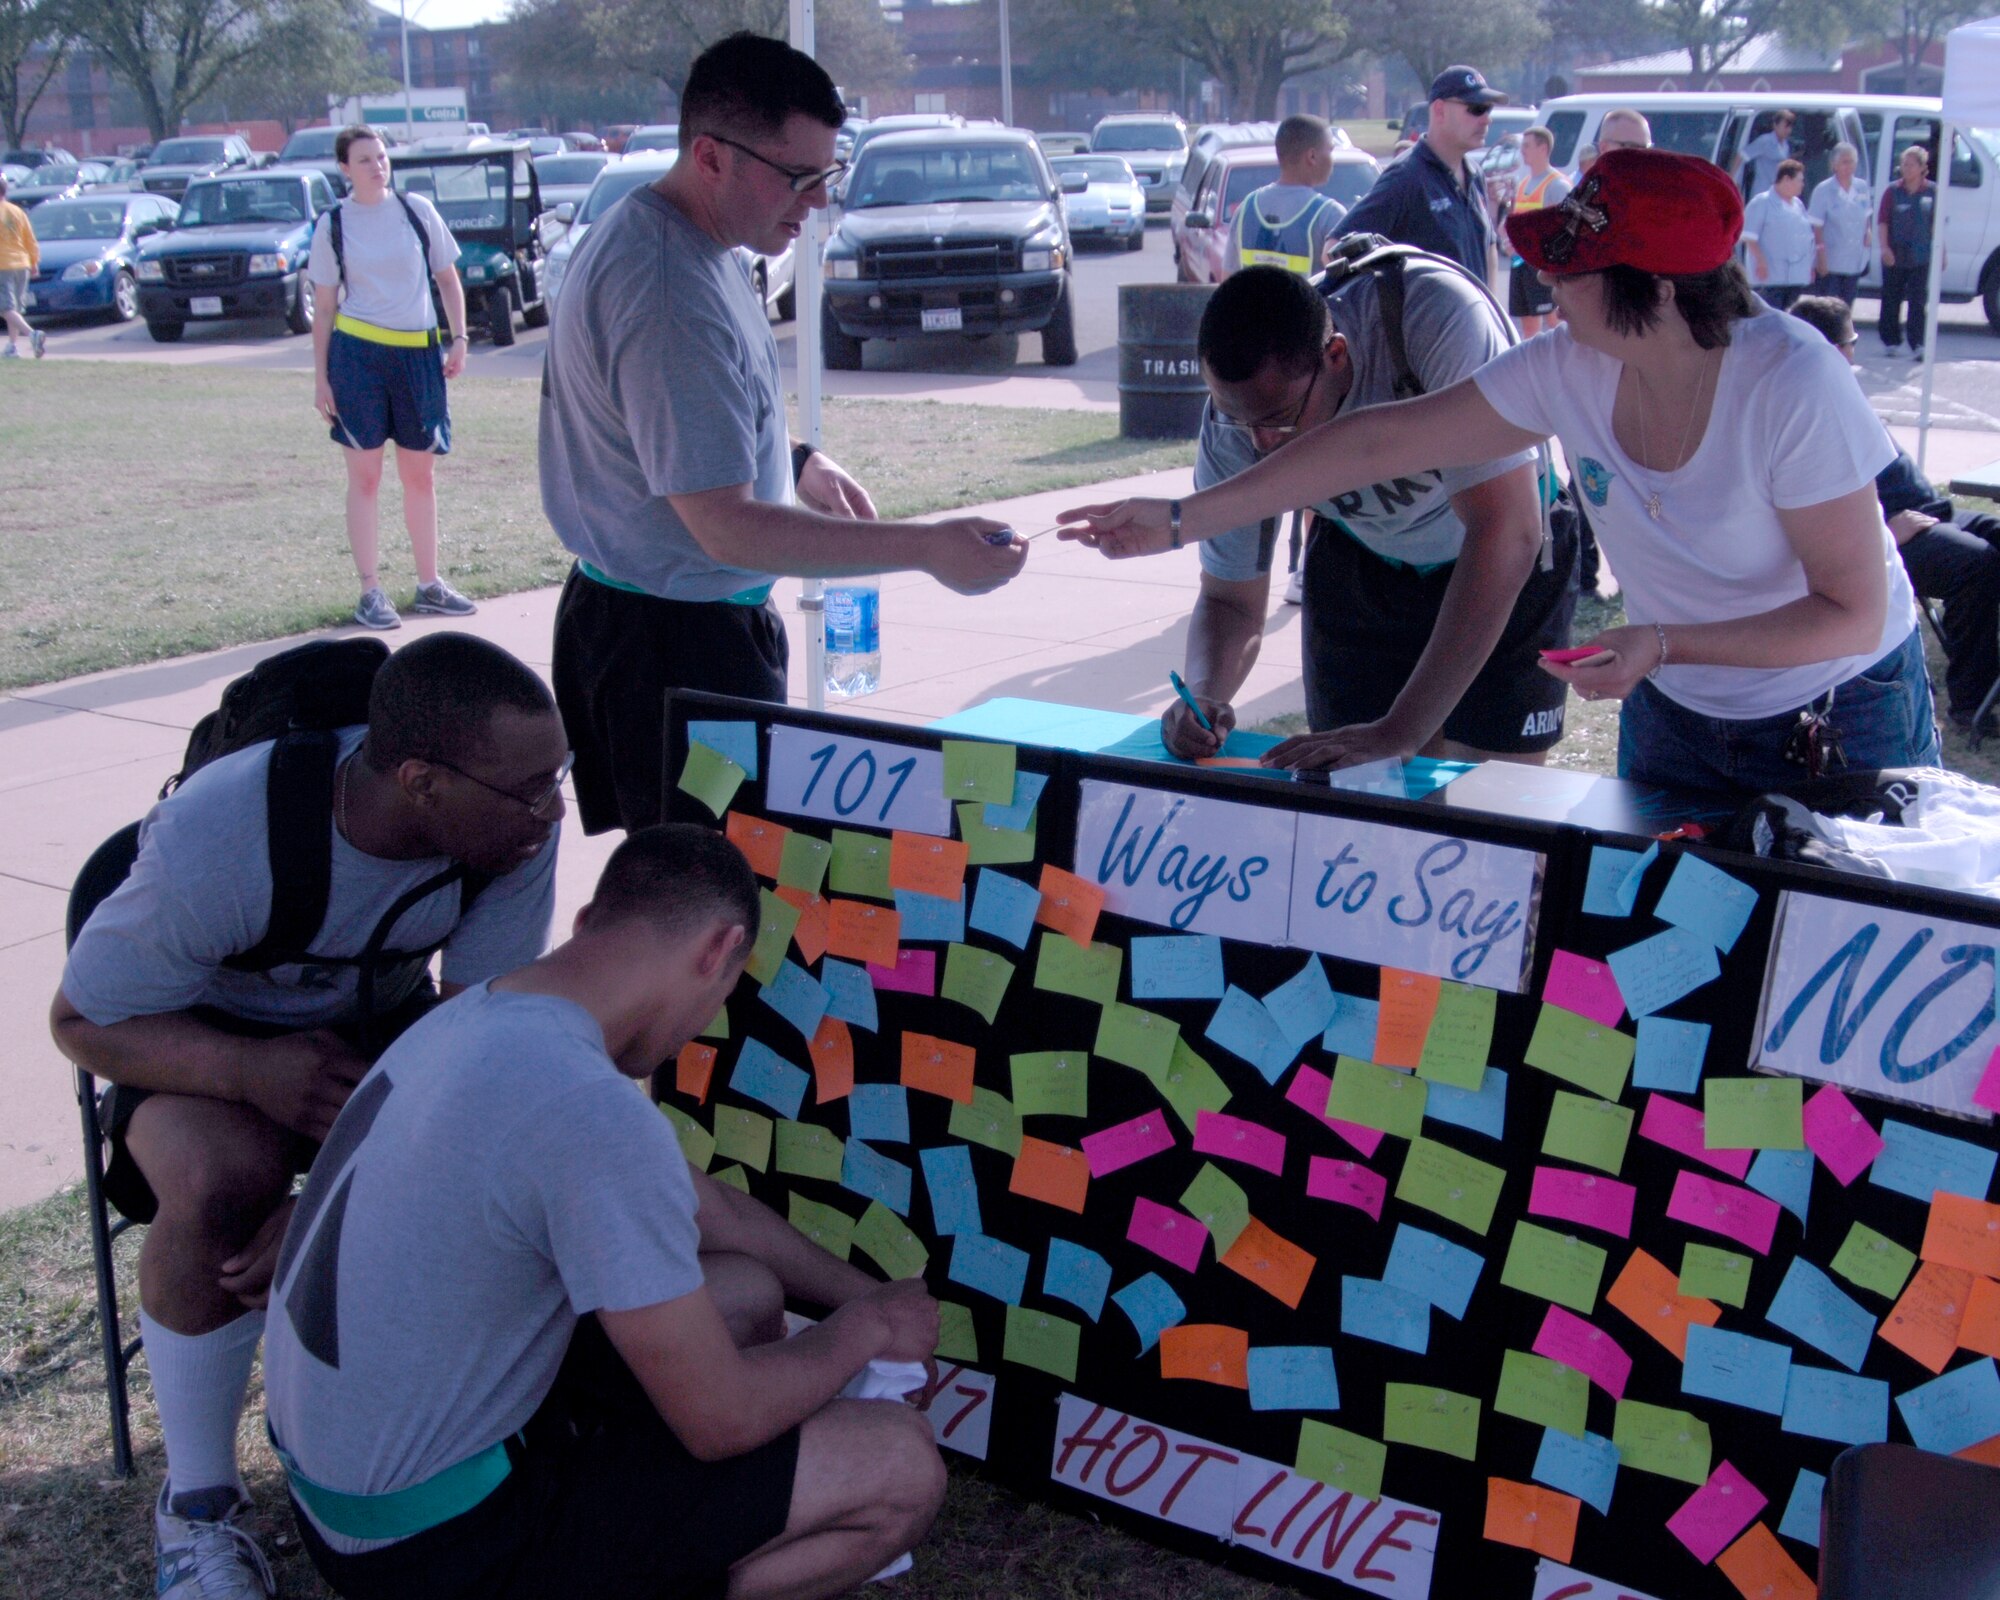 GOODFELLOW AIR FORCE BASE, Texas -Lori Matus, assistant to the Goodfellow Sexual Assault Response Coordinator, helps Soldiers with the 344th Military Intelligence Battalion post their reasons to say no to sex at the Sexual Assault Response Coordinator's booth during Safety Day May 27. Servicemembers wrote and attached ways to say no to sex in an effort to raise awareness and educate others about unsafe situations and high risk behaviors that can lead to sexual assault (U.S. Air Force photo/Tech. Sgt. Jon DuMond)

